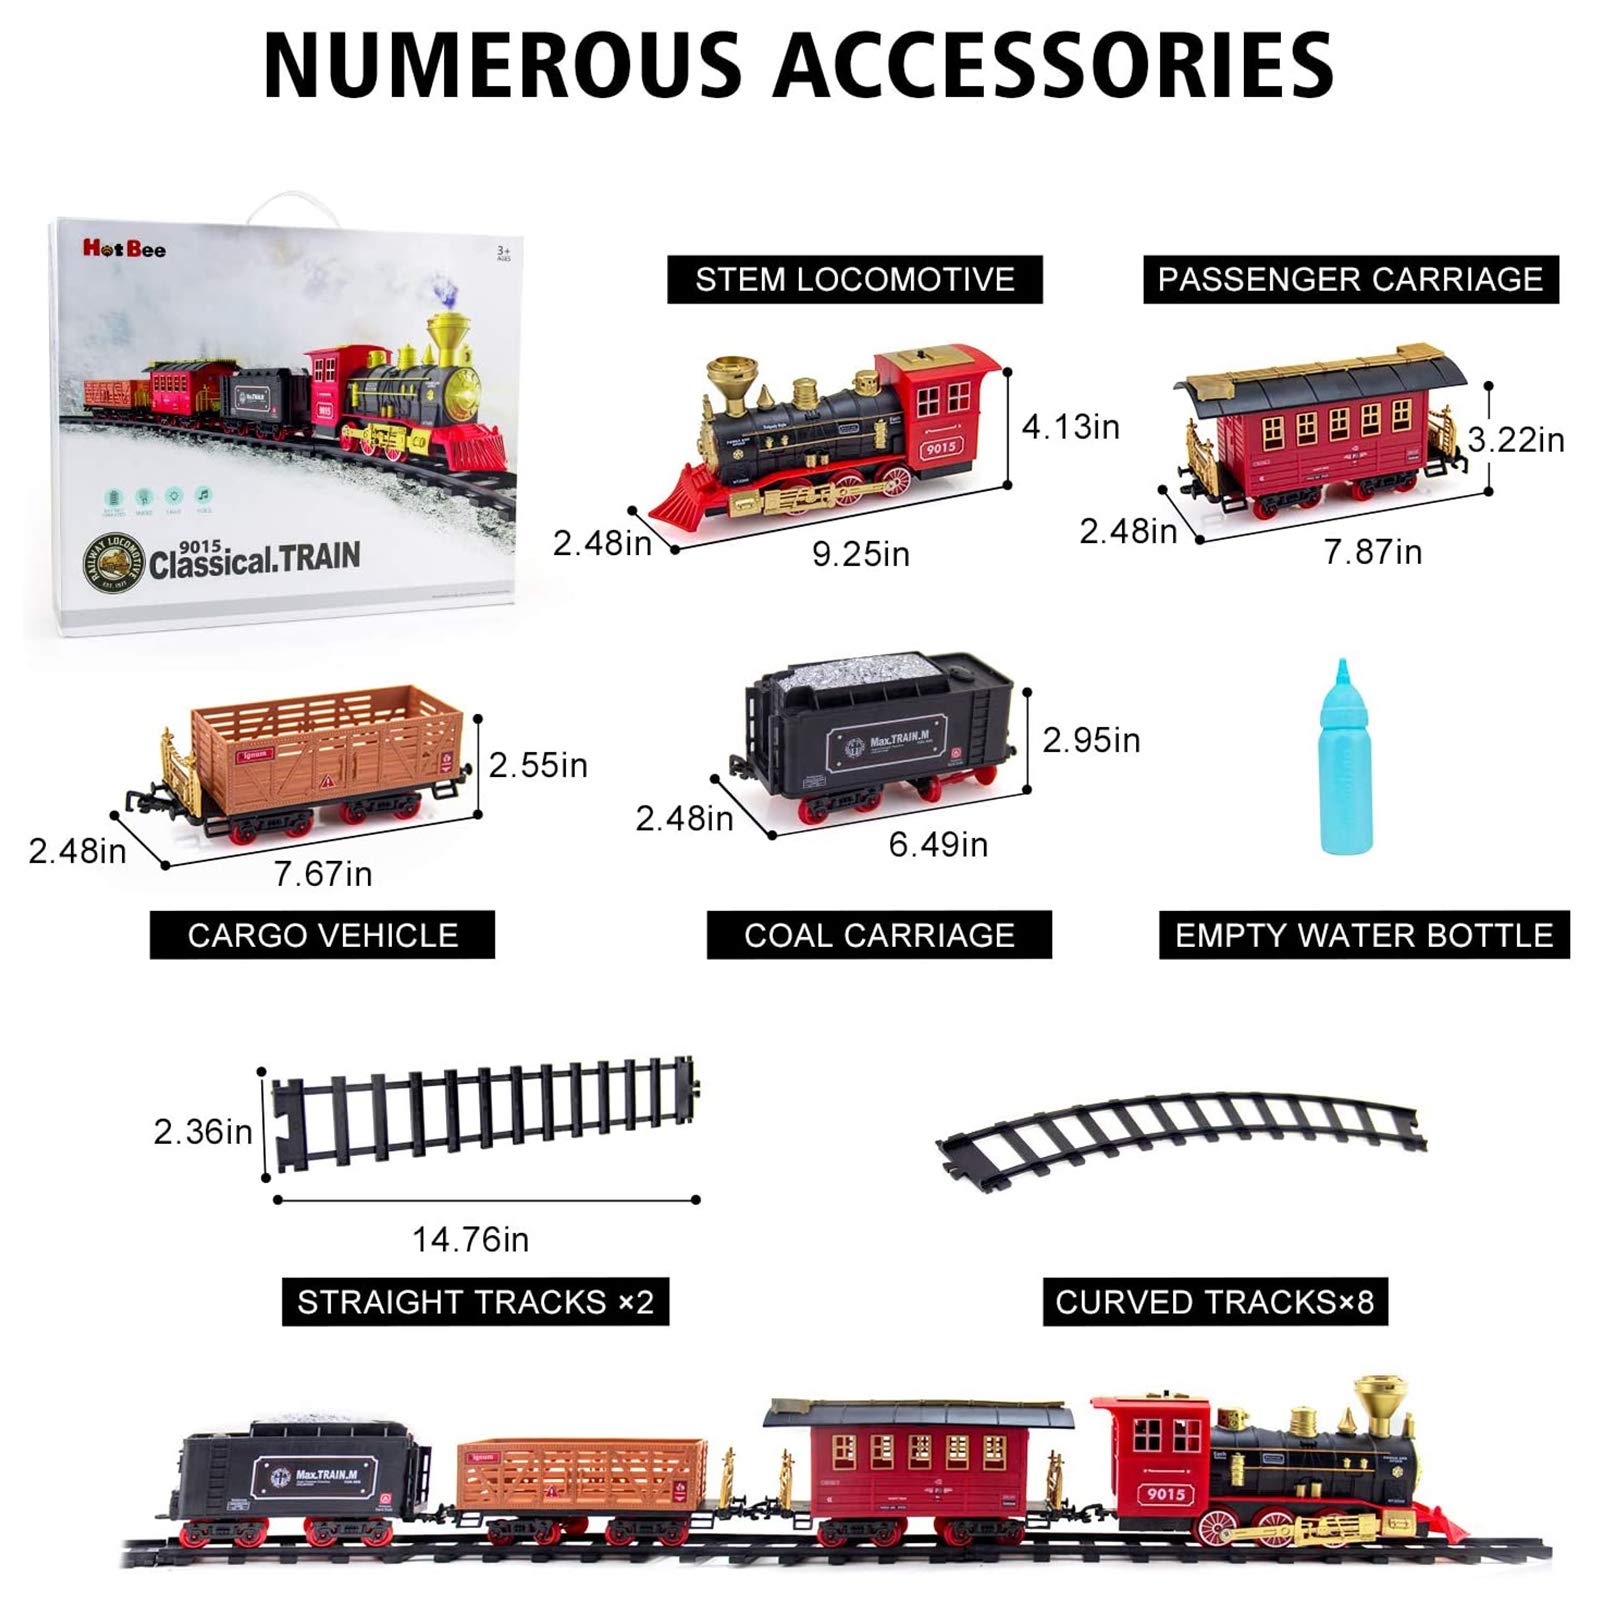 Hot Bee Train Set Toys for Kids with Smoke Light & Sounds Electric Railway Play trains with Steam Locomotive Engine,Cargo Cars&Tracks for 3 4 5 6 7 8 Year Old Boys Girls 